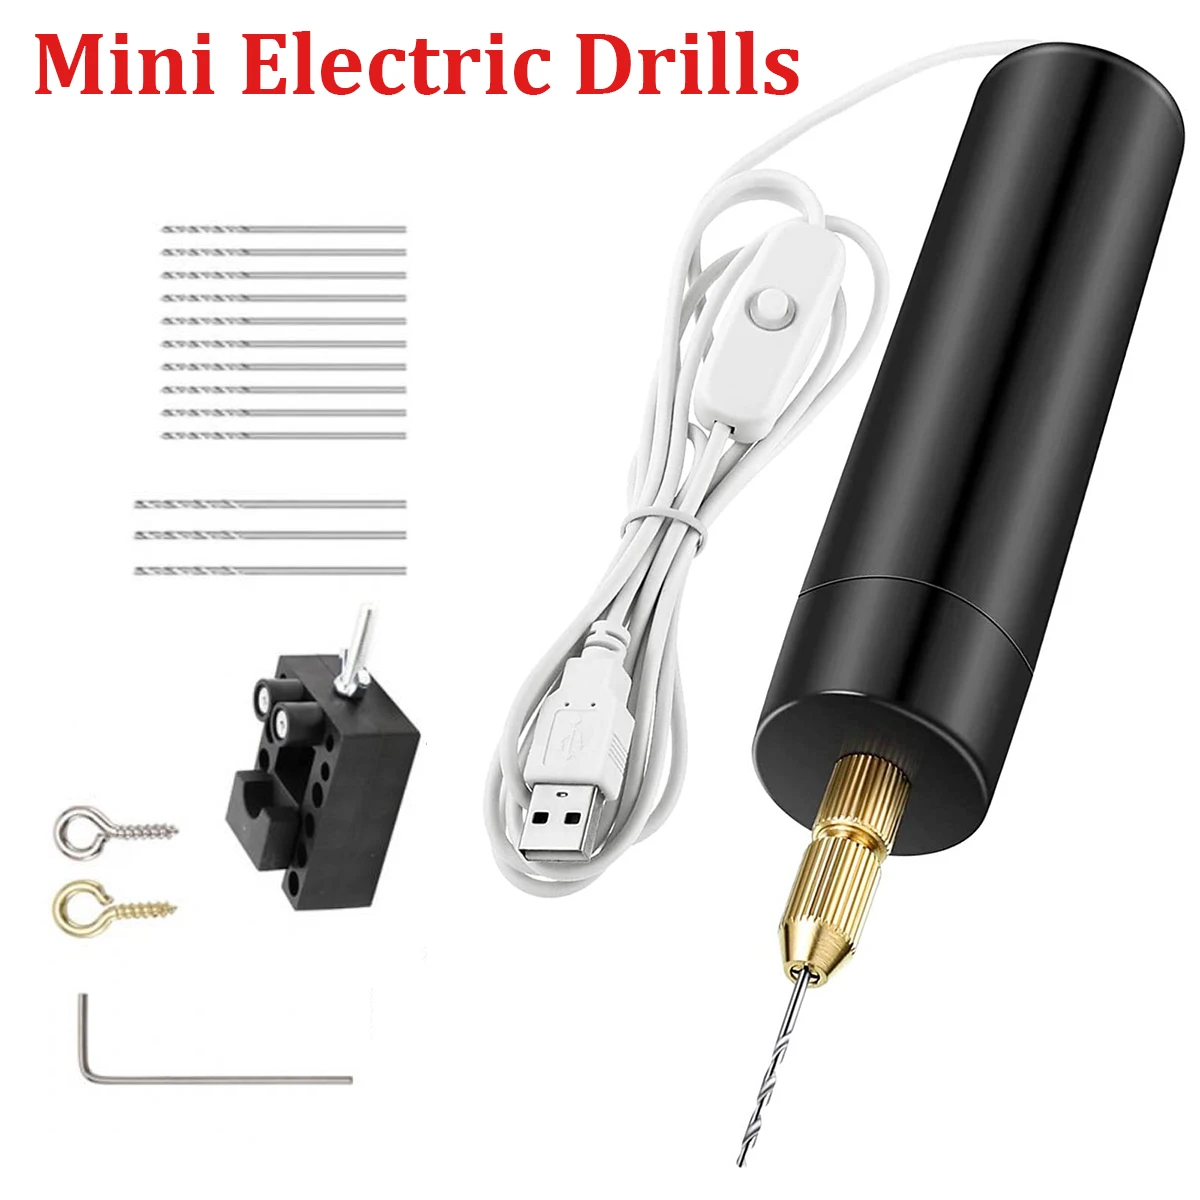 Mini Electric Drills Portable Handheld USB Drill Rotary Tools Engraver Pen Drilling Jewelry Tools With Drill Bits Power Tools